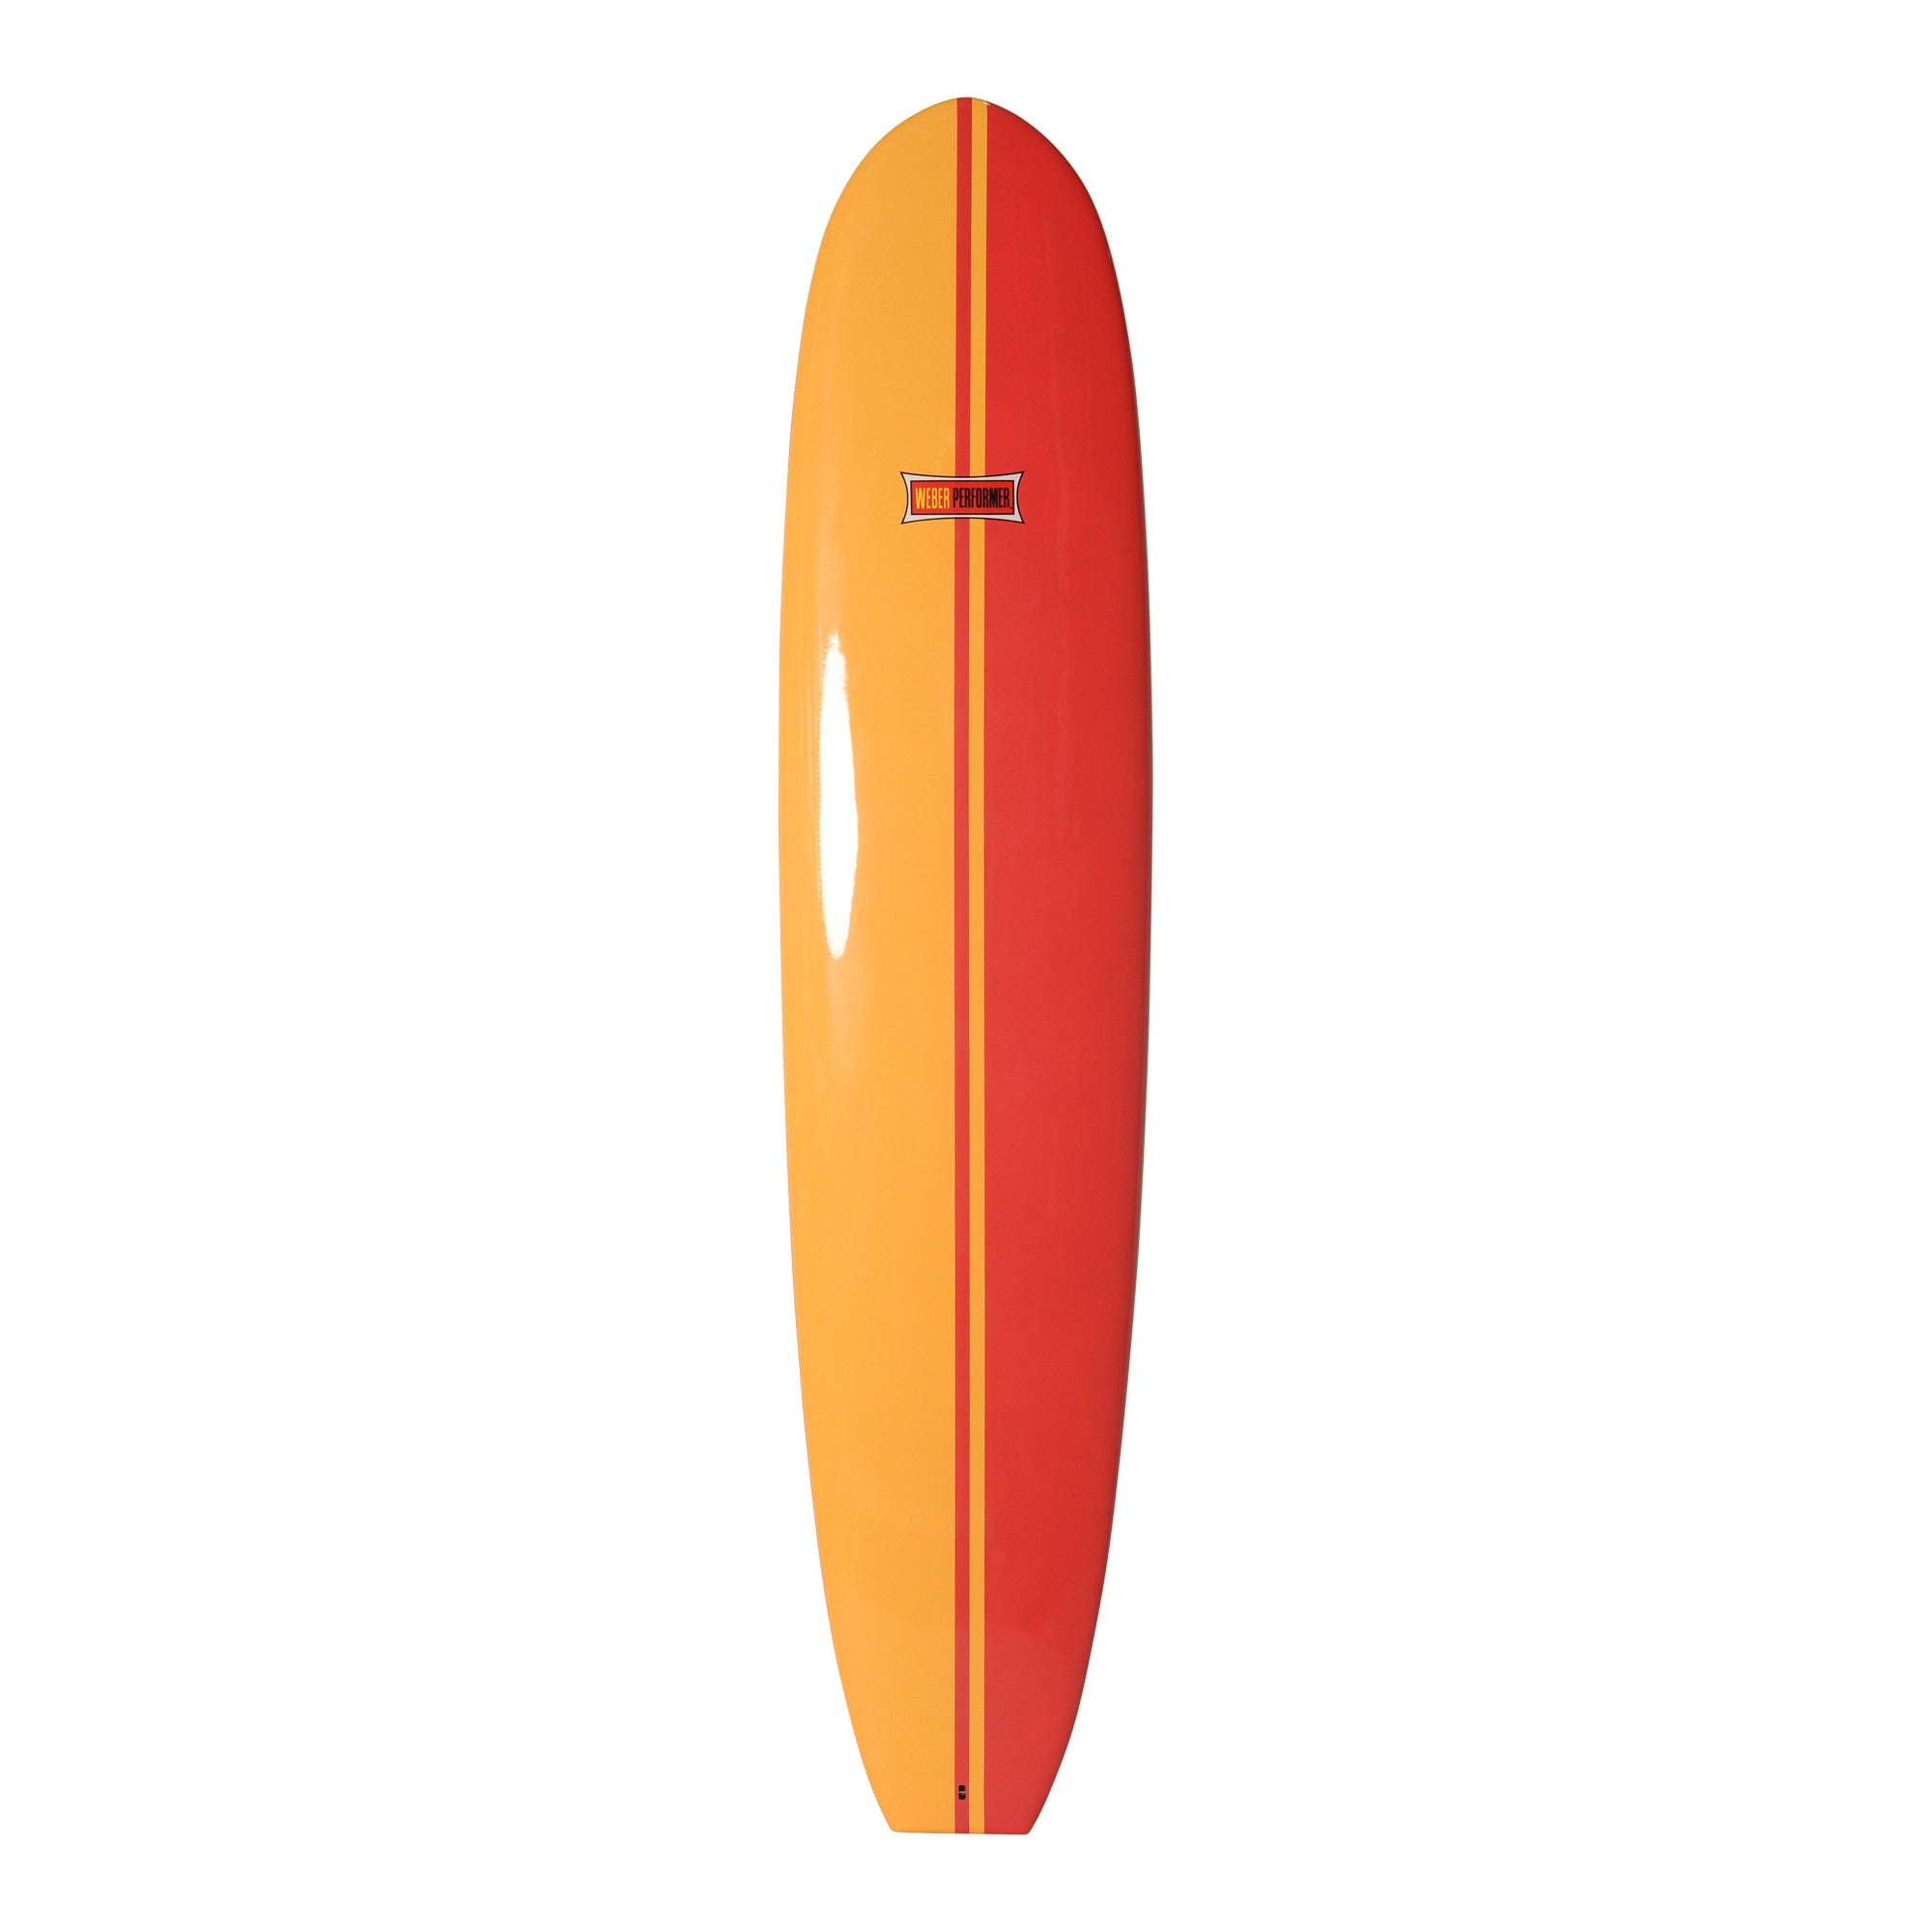 WEBER SURFBOARDS - Performer 9'4 - Red / Yellow